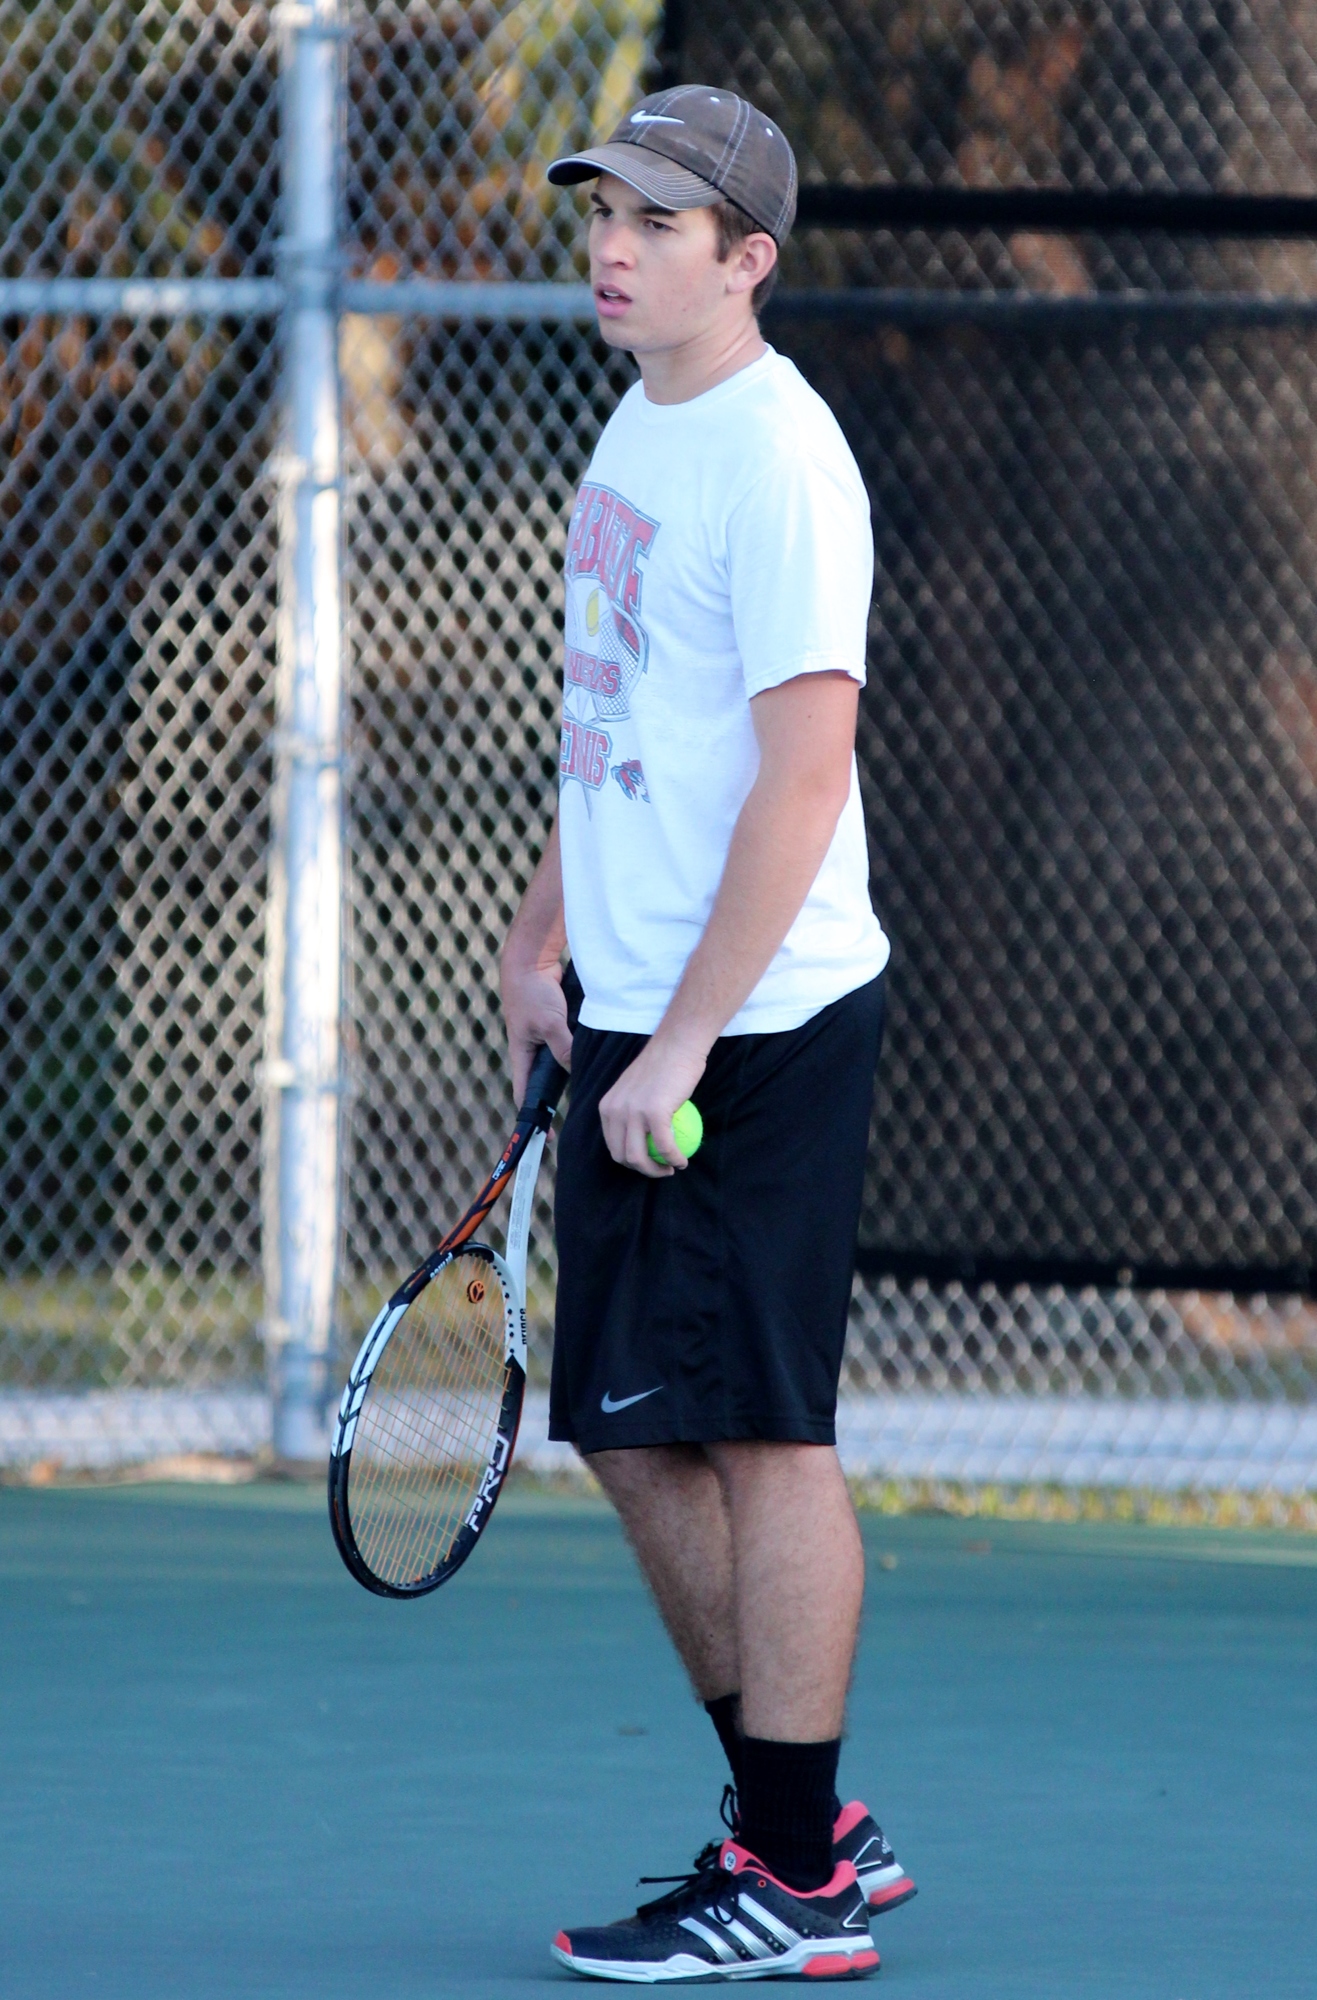 Noah Thompson won his singles and doubles match (along with Will Greaves) 8-1.